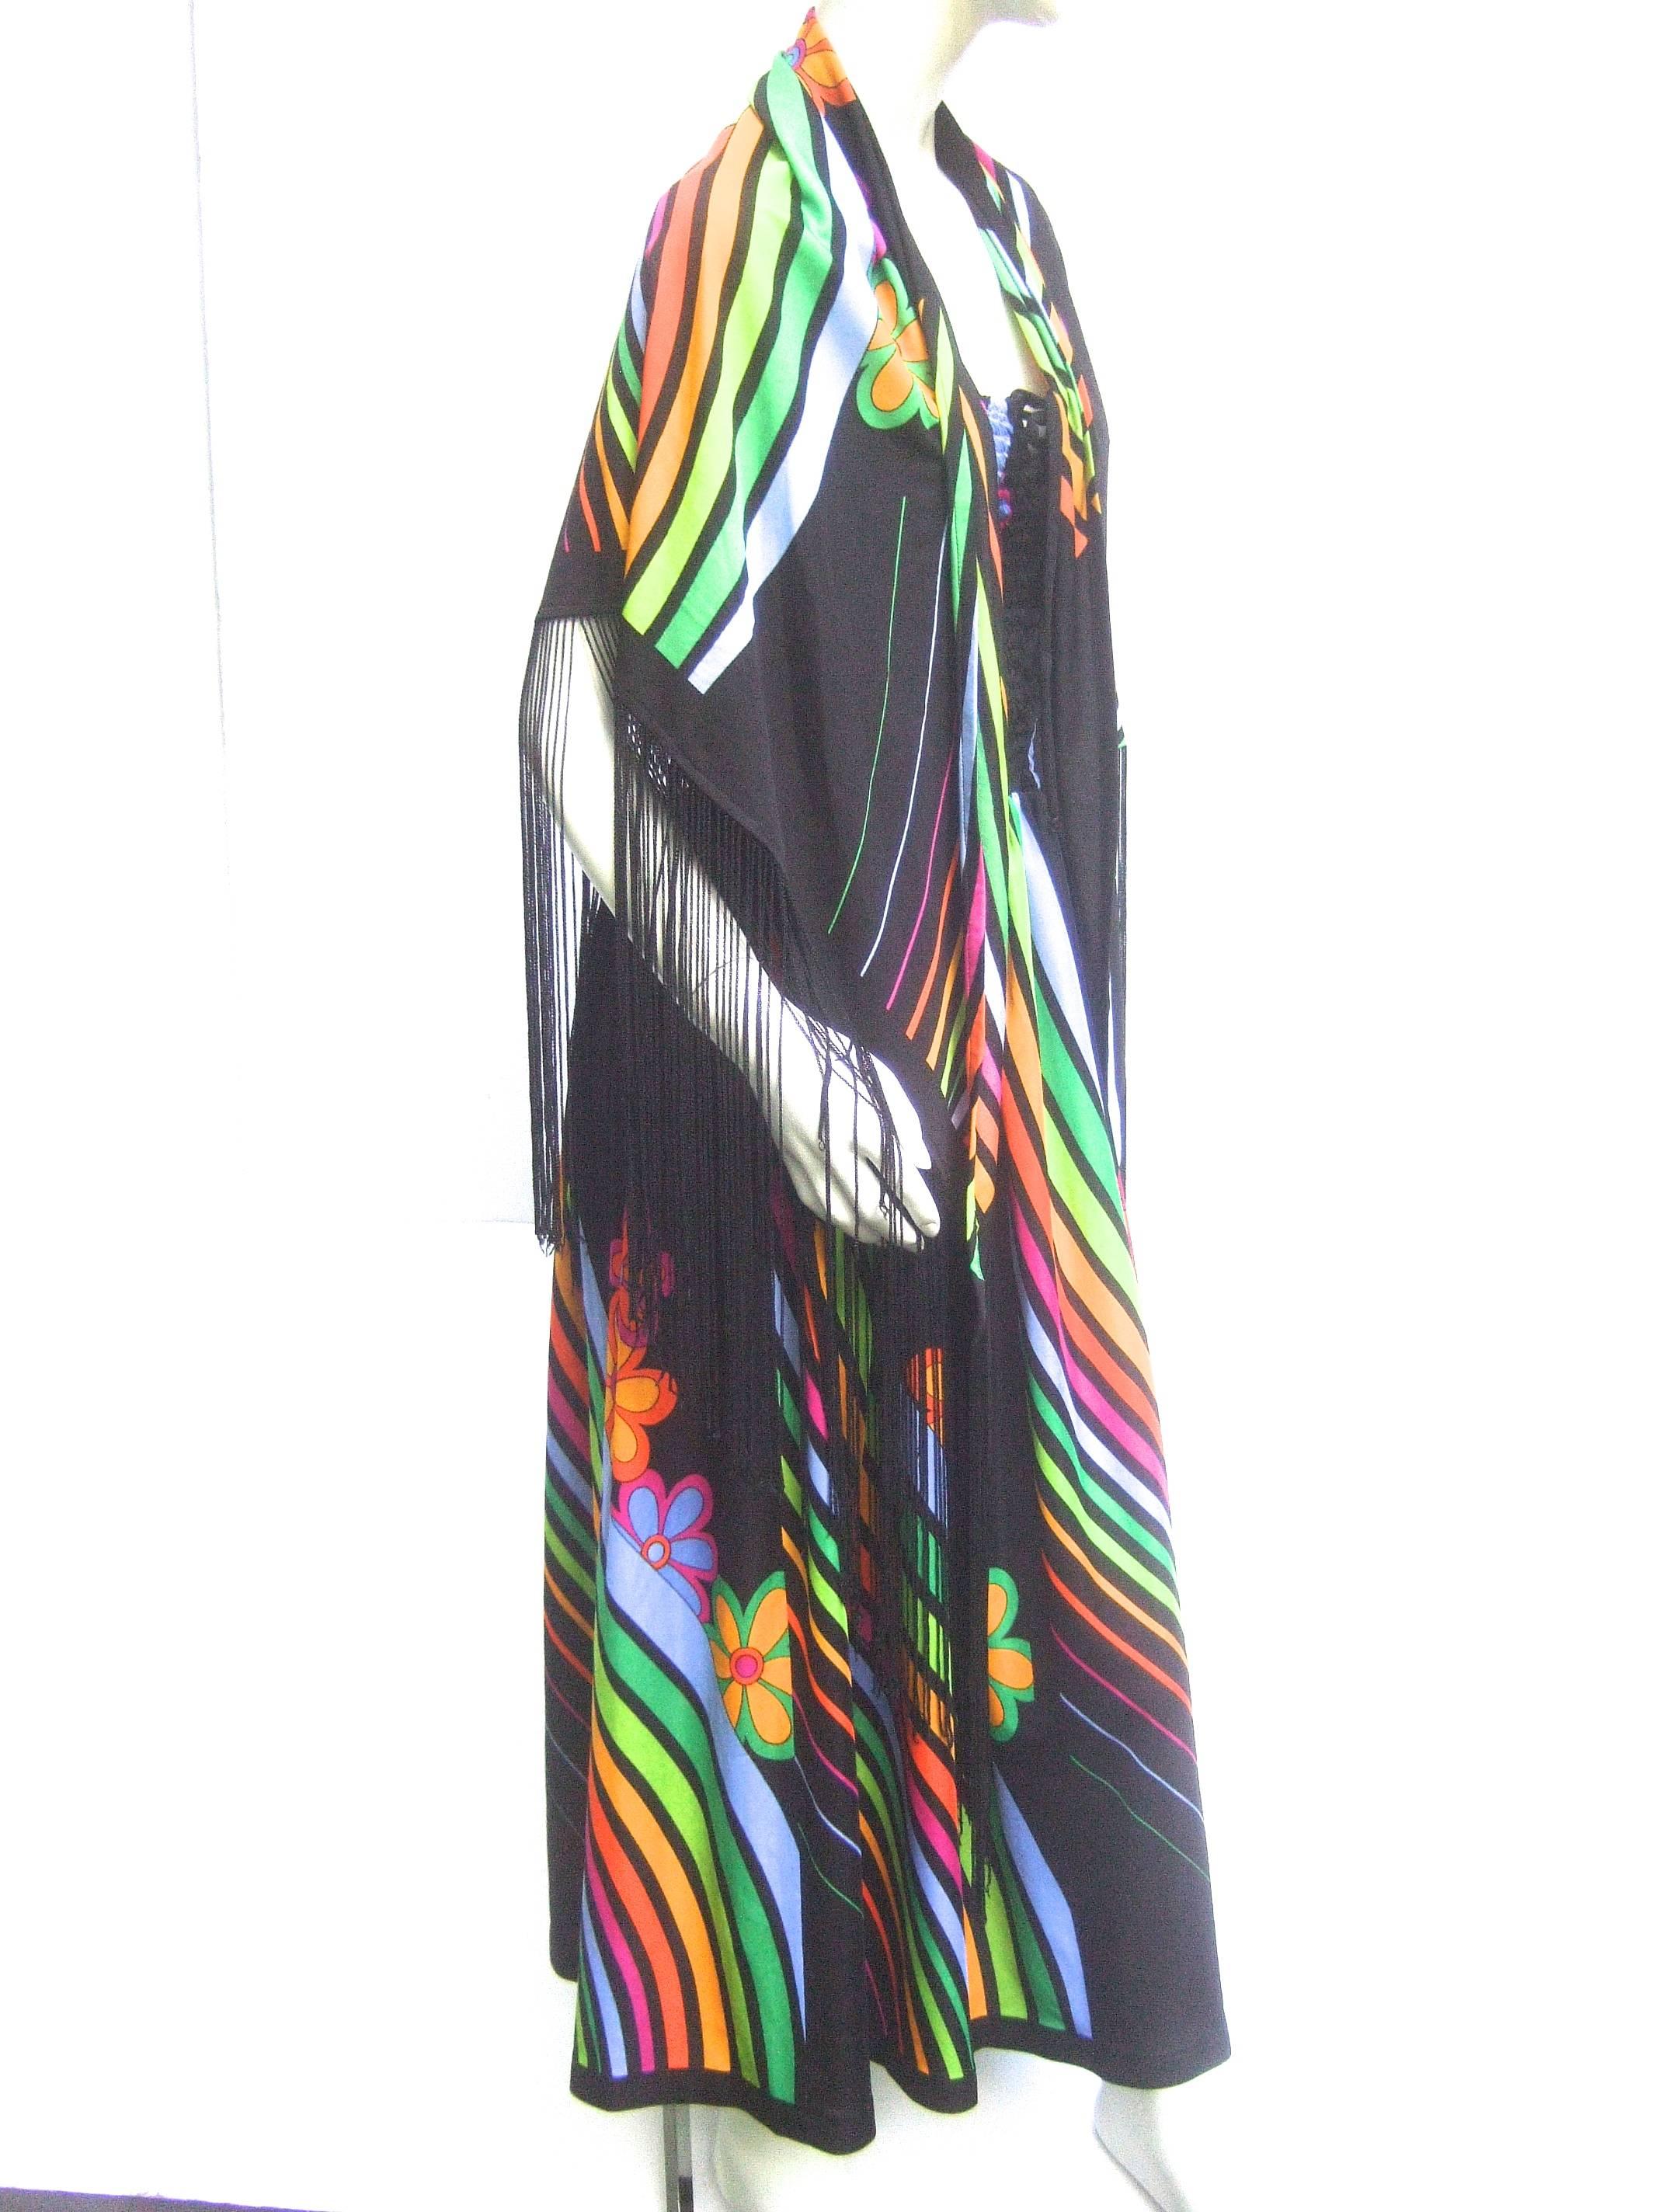 Women's Super Cool 70's Bodice Dress with Fringed Cape. For Sale